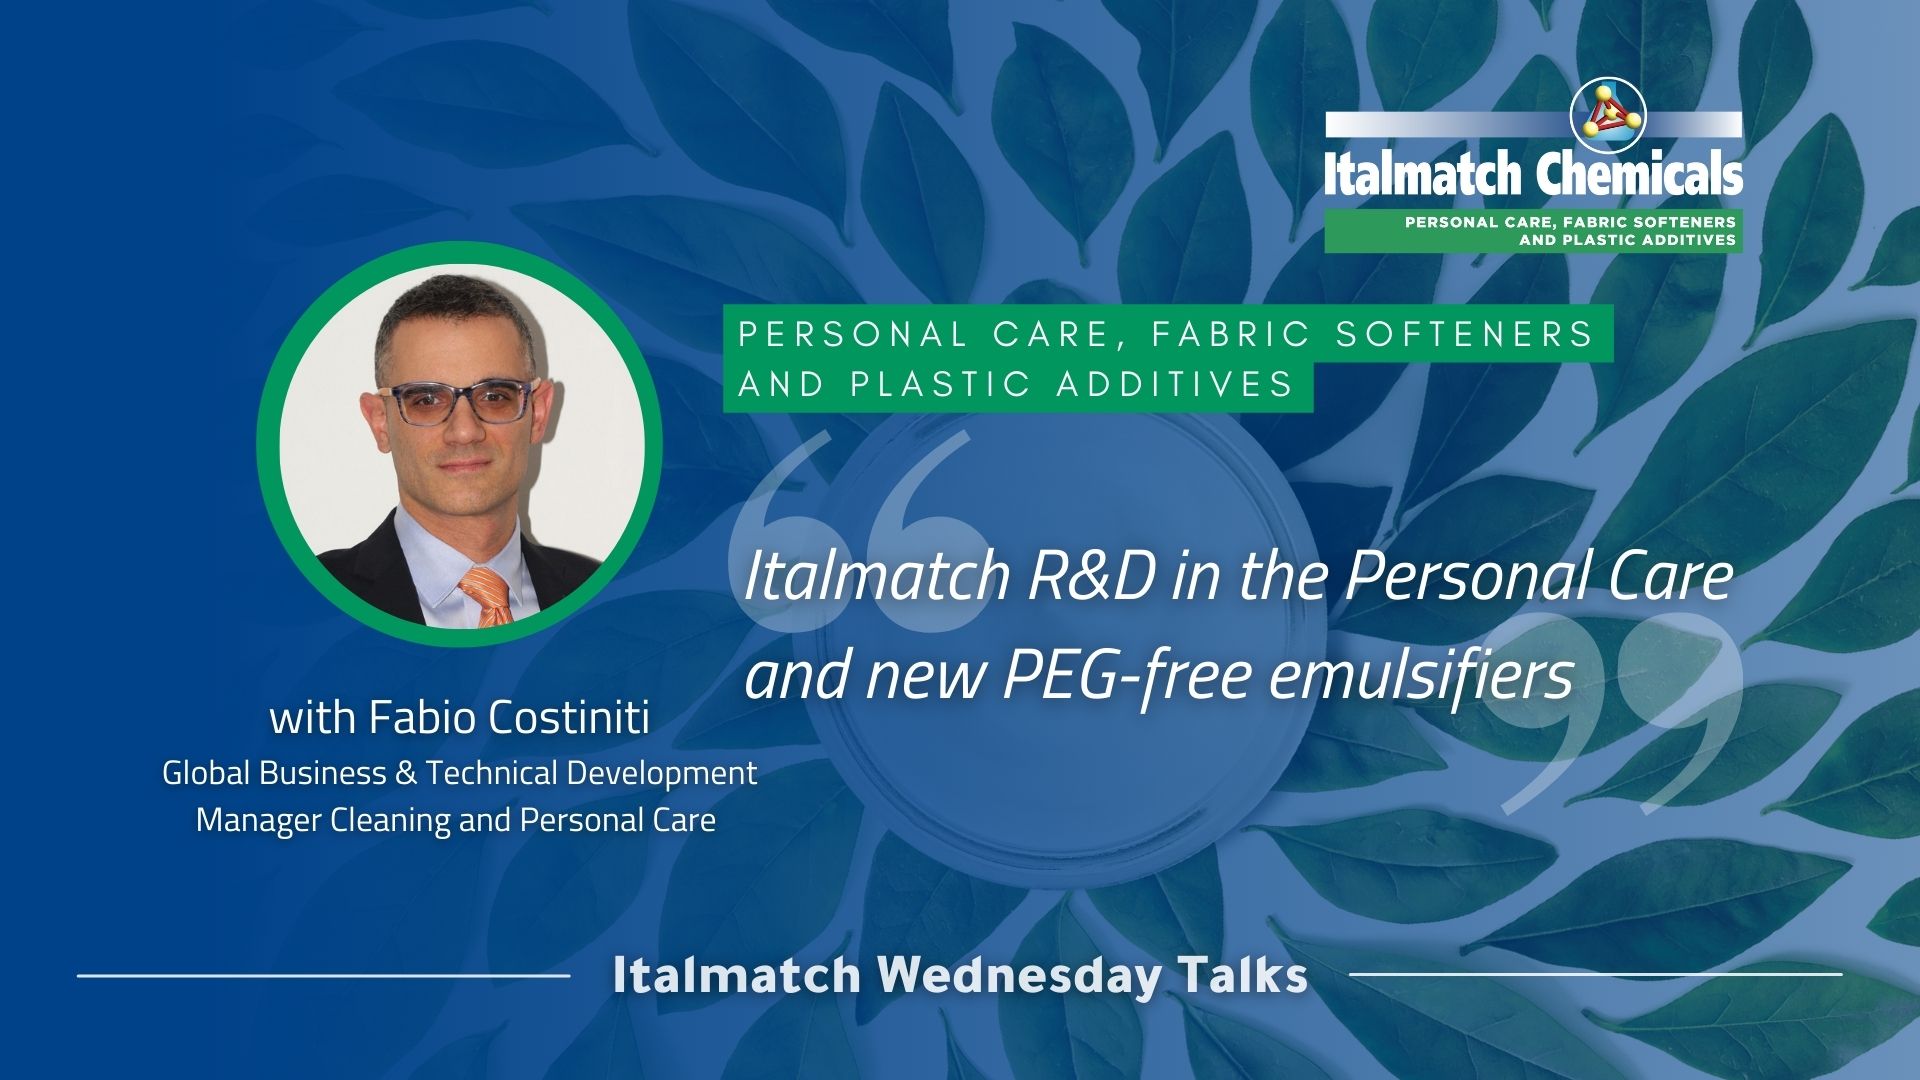 Italmatch R&D in the Personal Care and new PEG-free emulsifiers_Interview with Fabio Costiniti_website